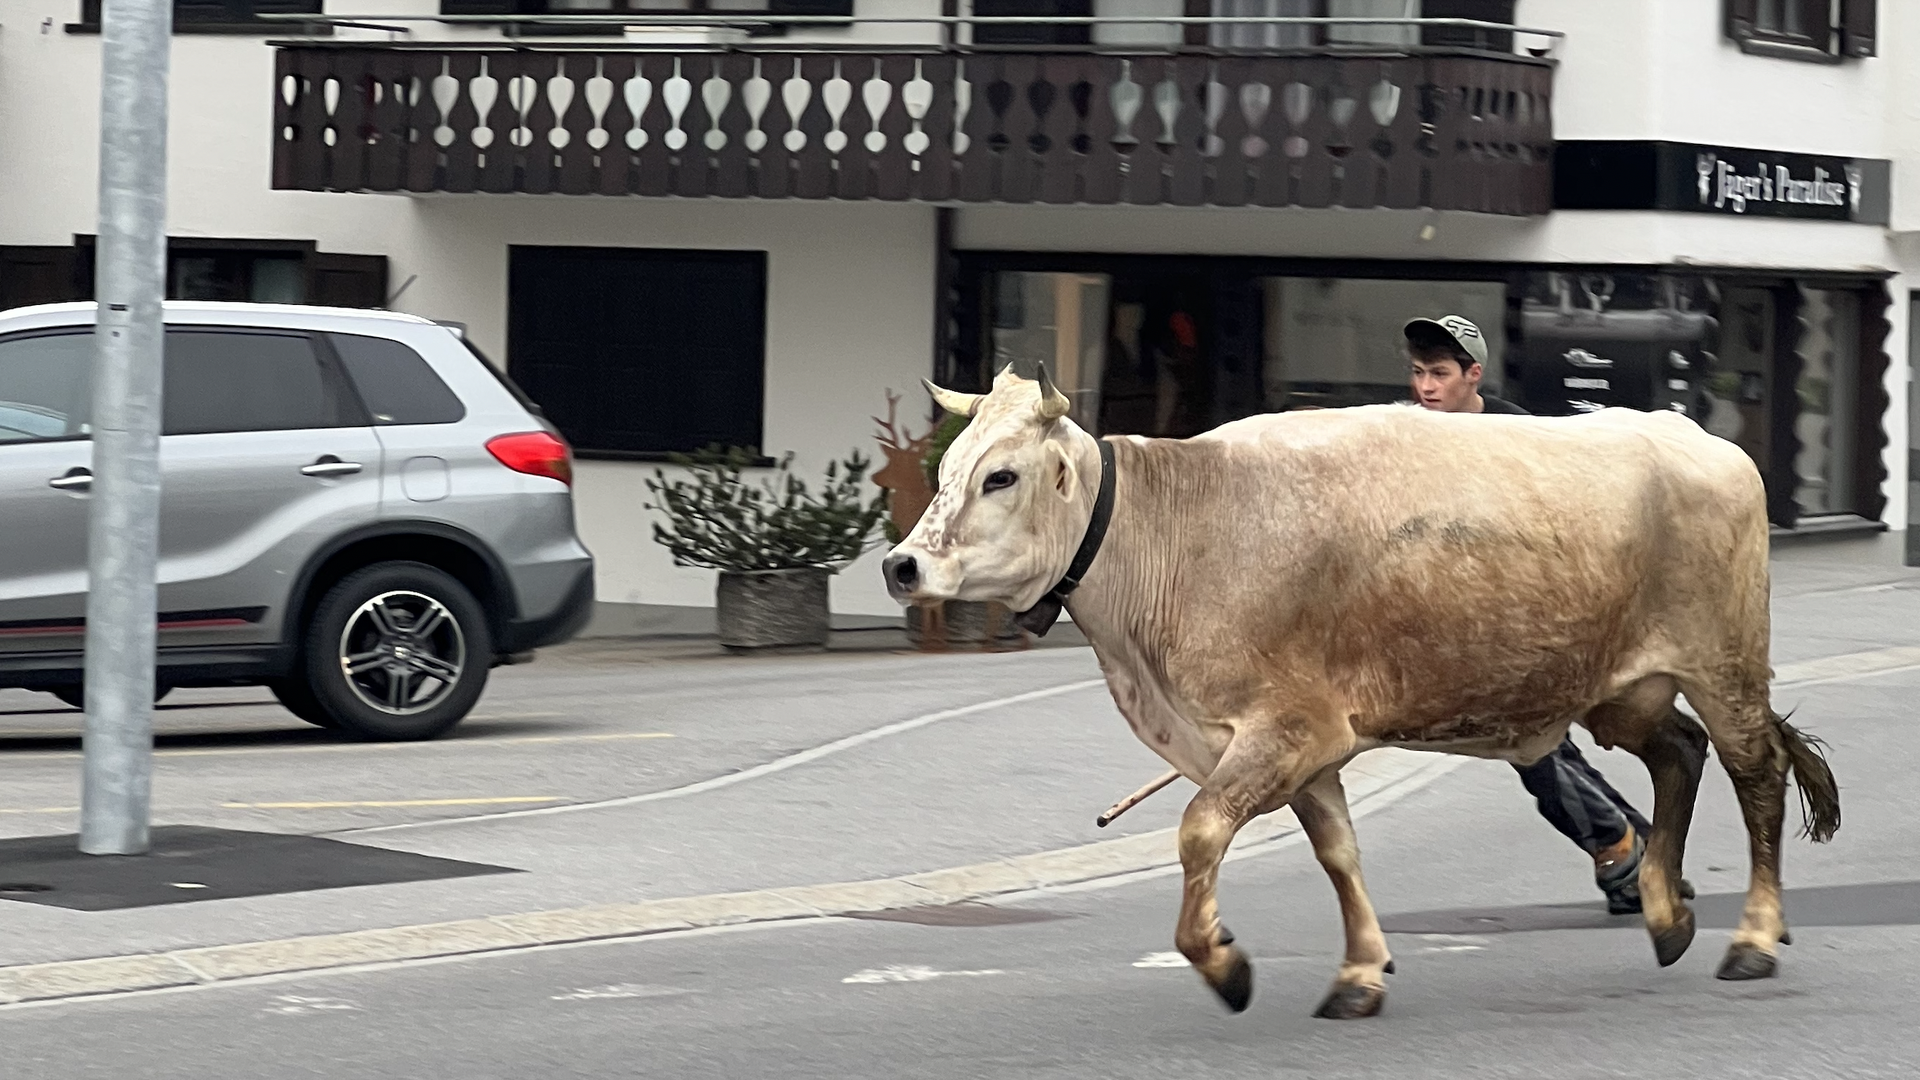 A runaway cow on the streets of Klosters, Switzerland.